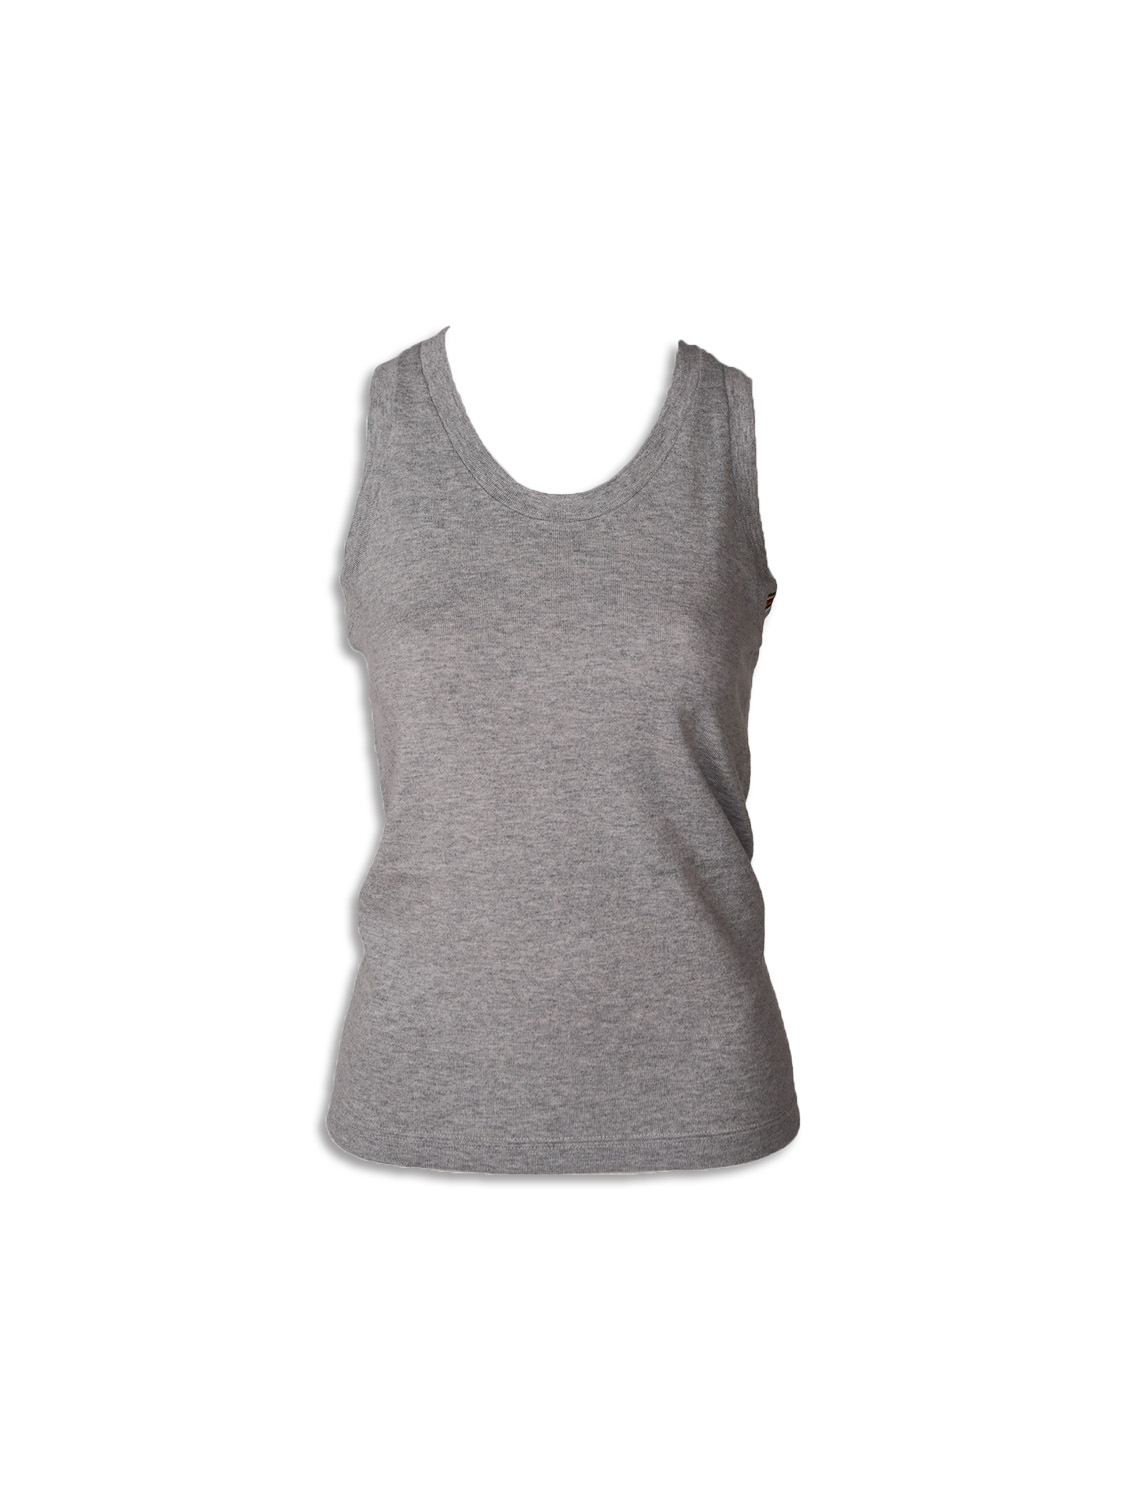 n° 271 Vest Mesh - Top with perforated knit in cashmere-cotton blend